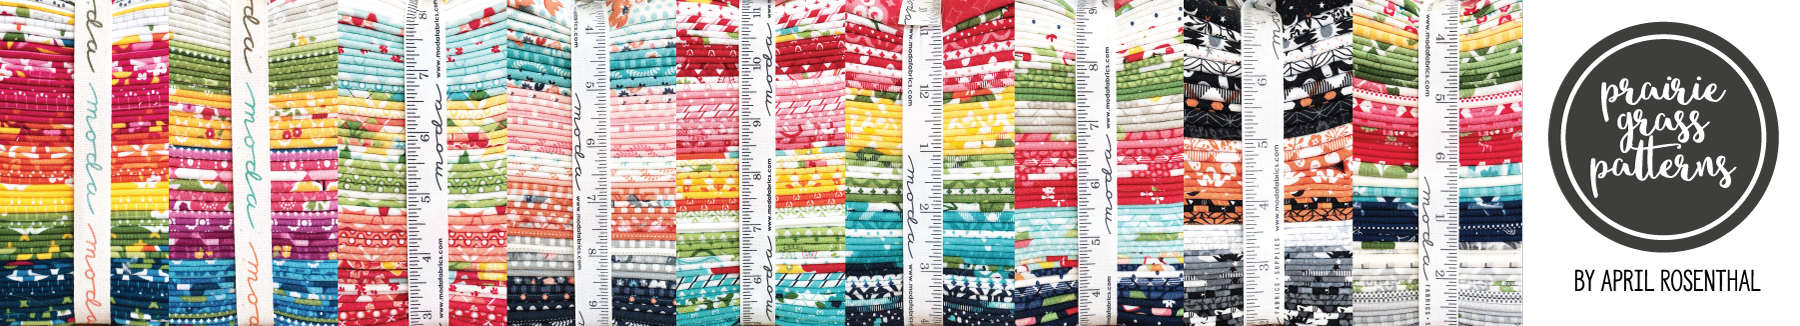 april rosenthal designer for prairie grass patterns - fabric. quilts. other awesome stuff.